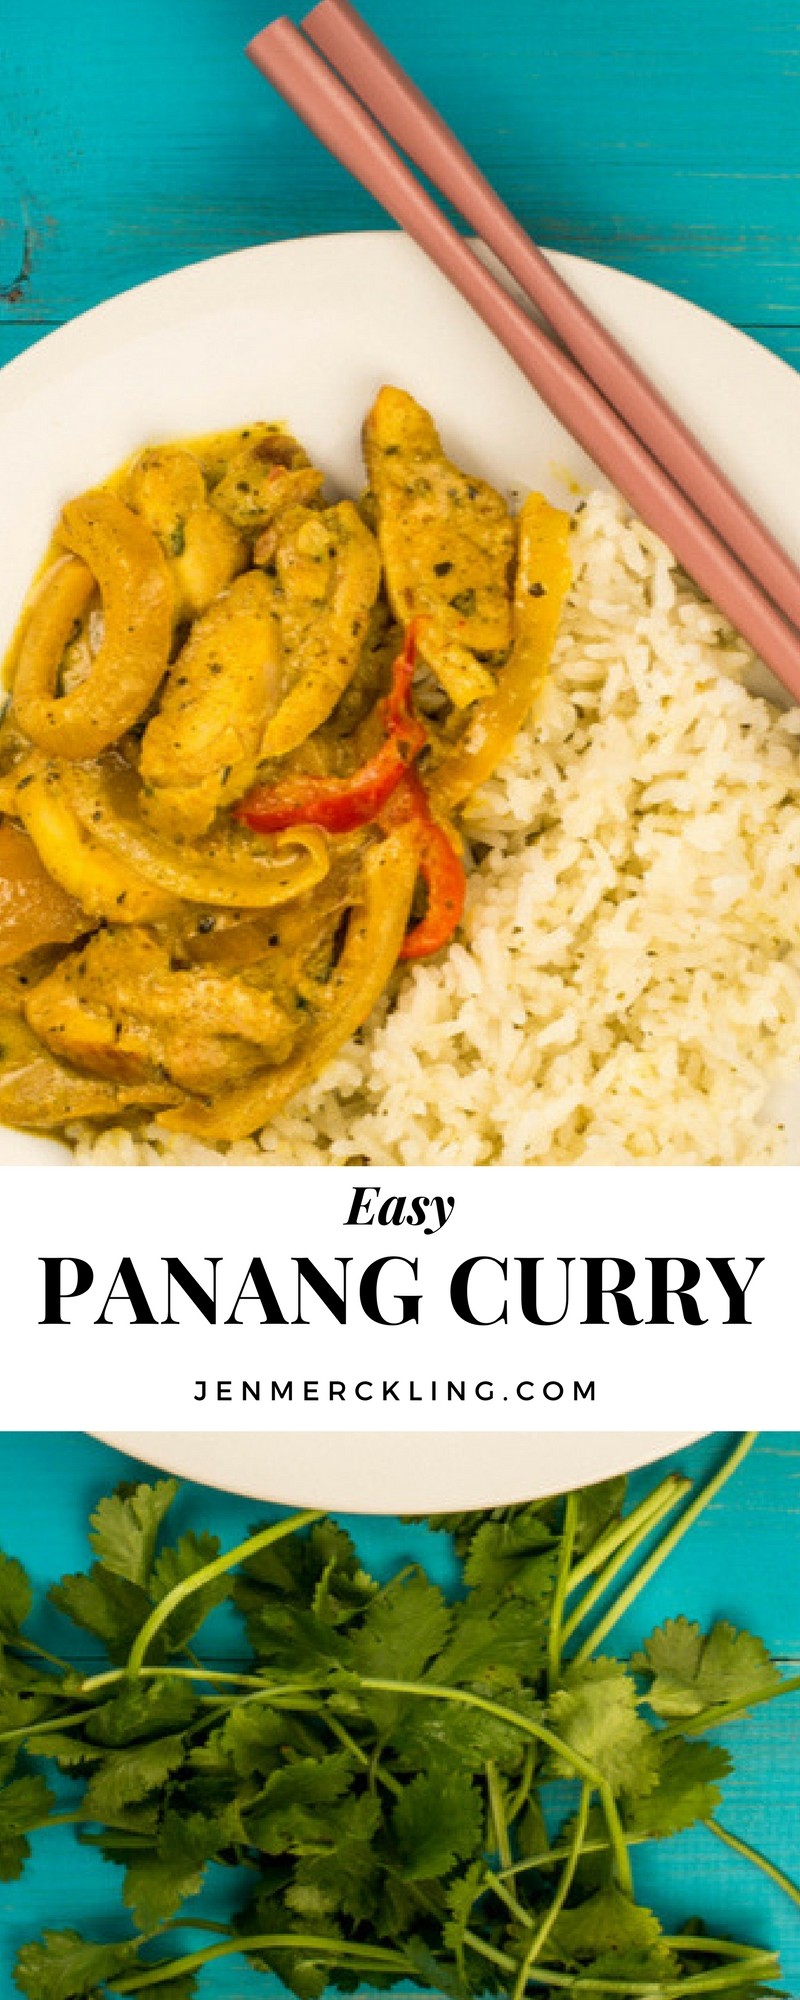 Easy Panang Curry recipe you will love! I've spent years trying to recreate my favorite Thai dish at home! Finally, I found the right balance of flavors! Plus-- it's quick, easy, and requires only 6 pantry items!